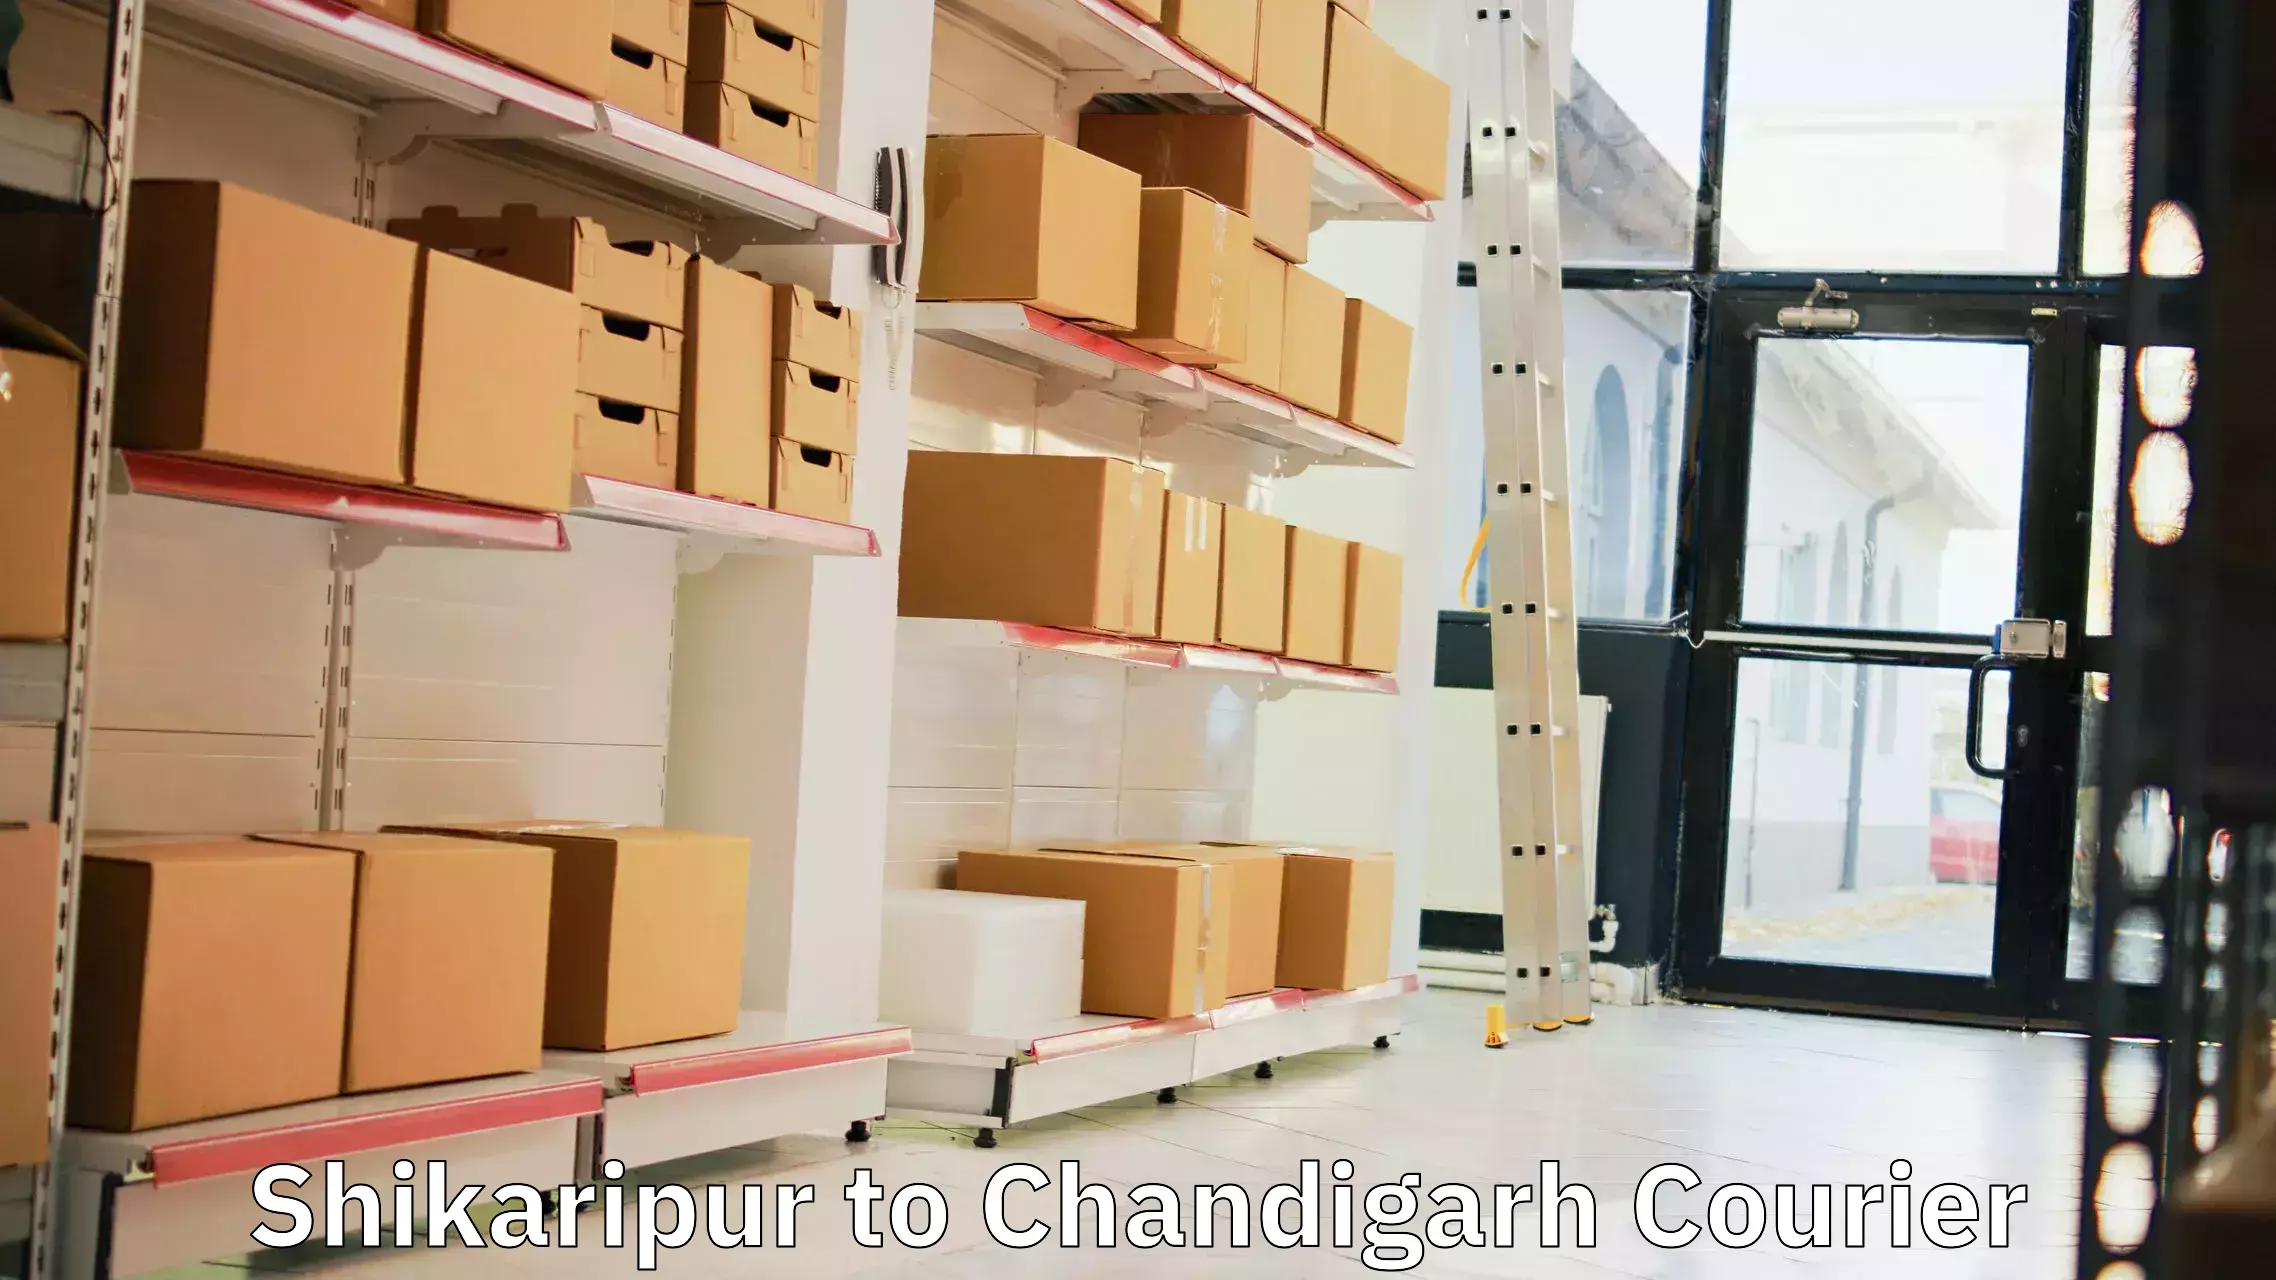 Courier service innovation Shikaripur to Chandigarh